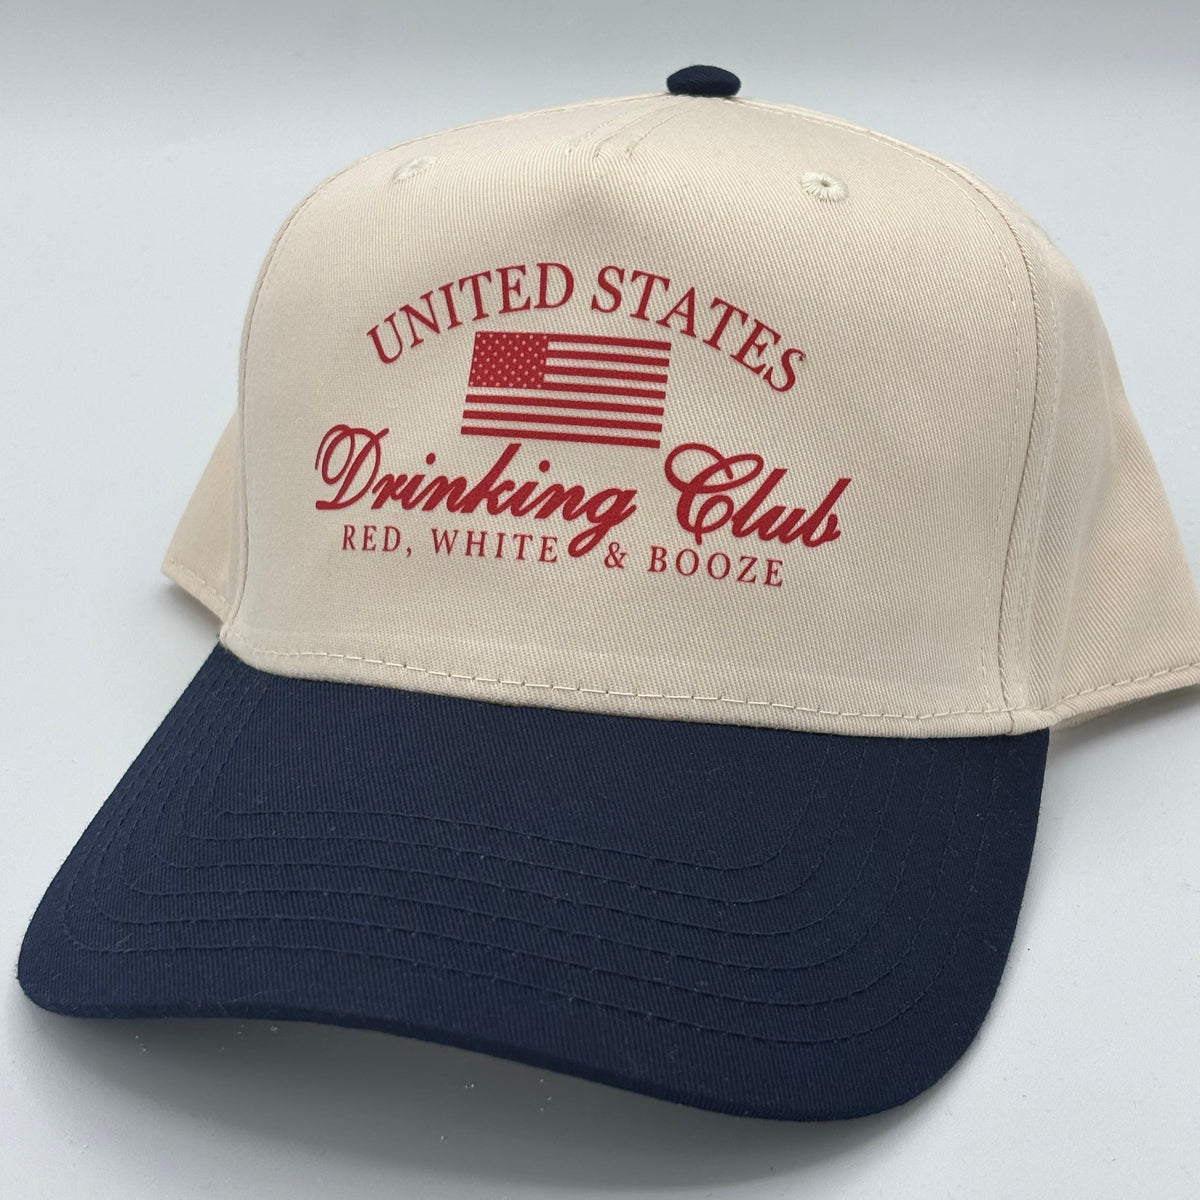 'United States Drinking Club' Hat - *FINAL SALE*